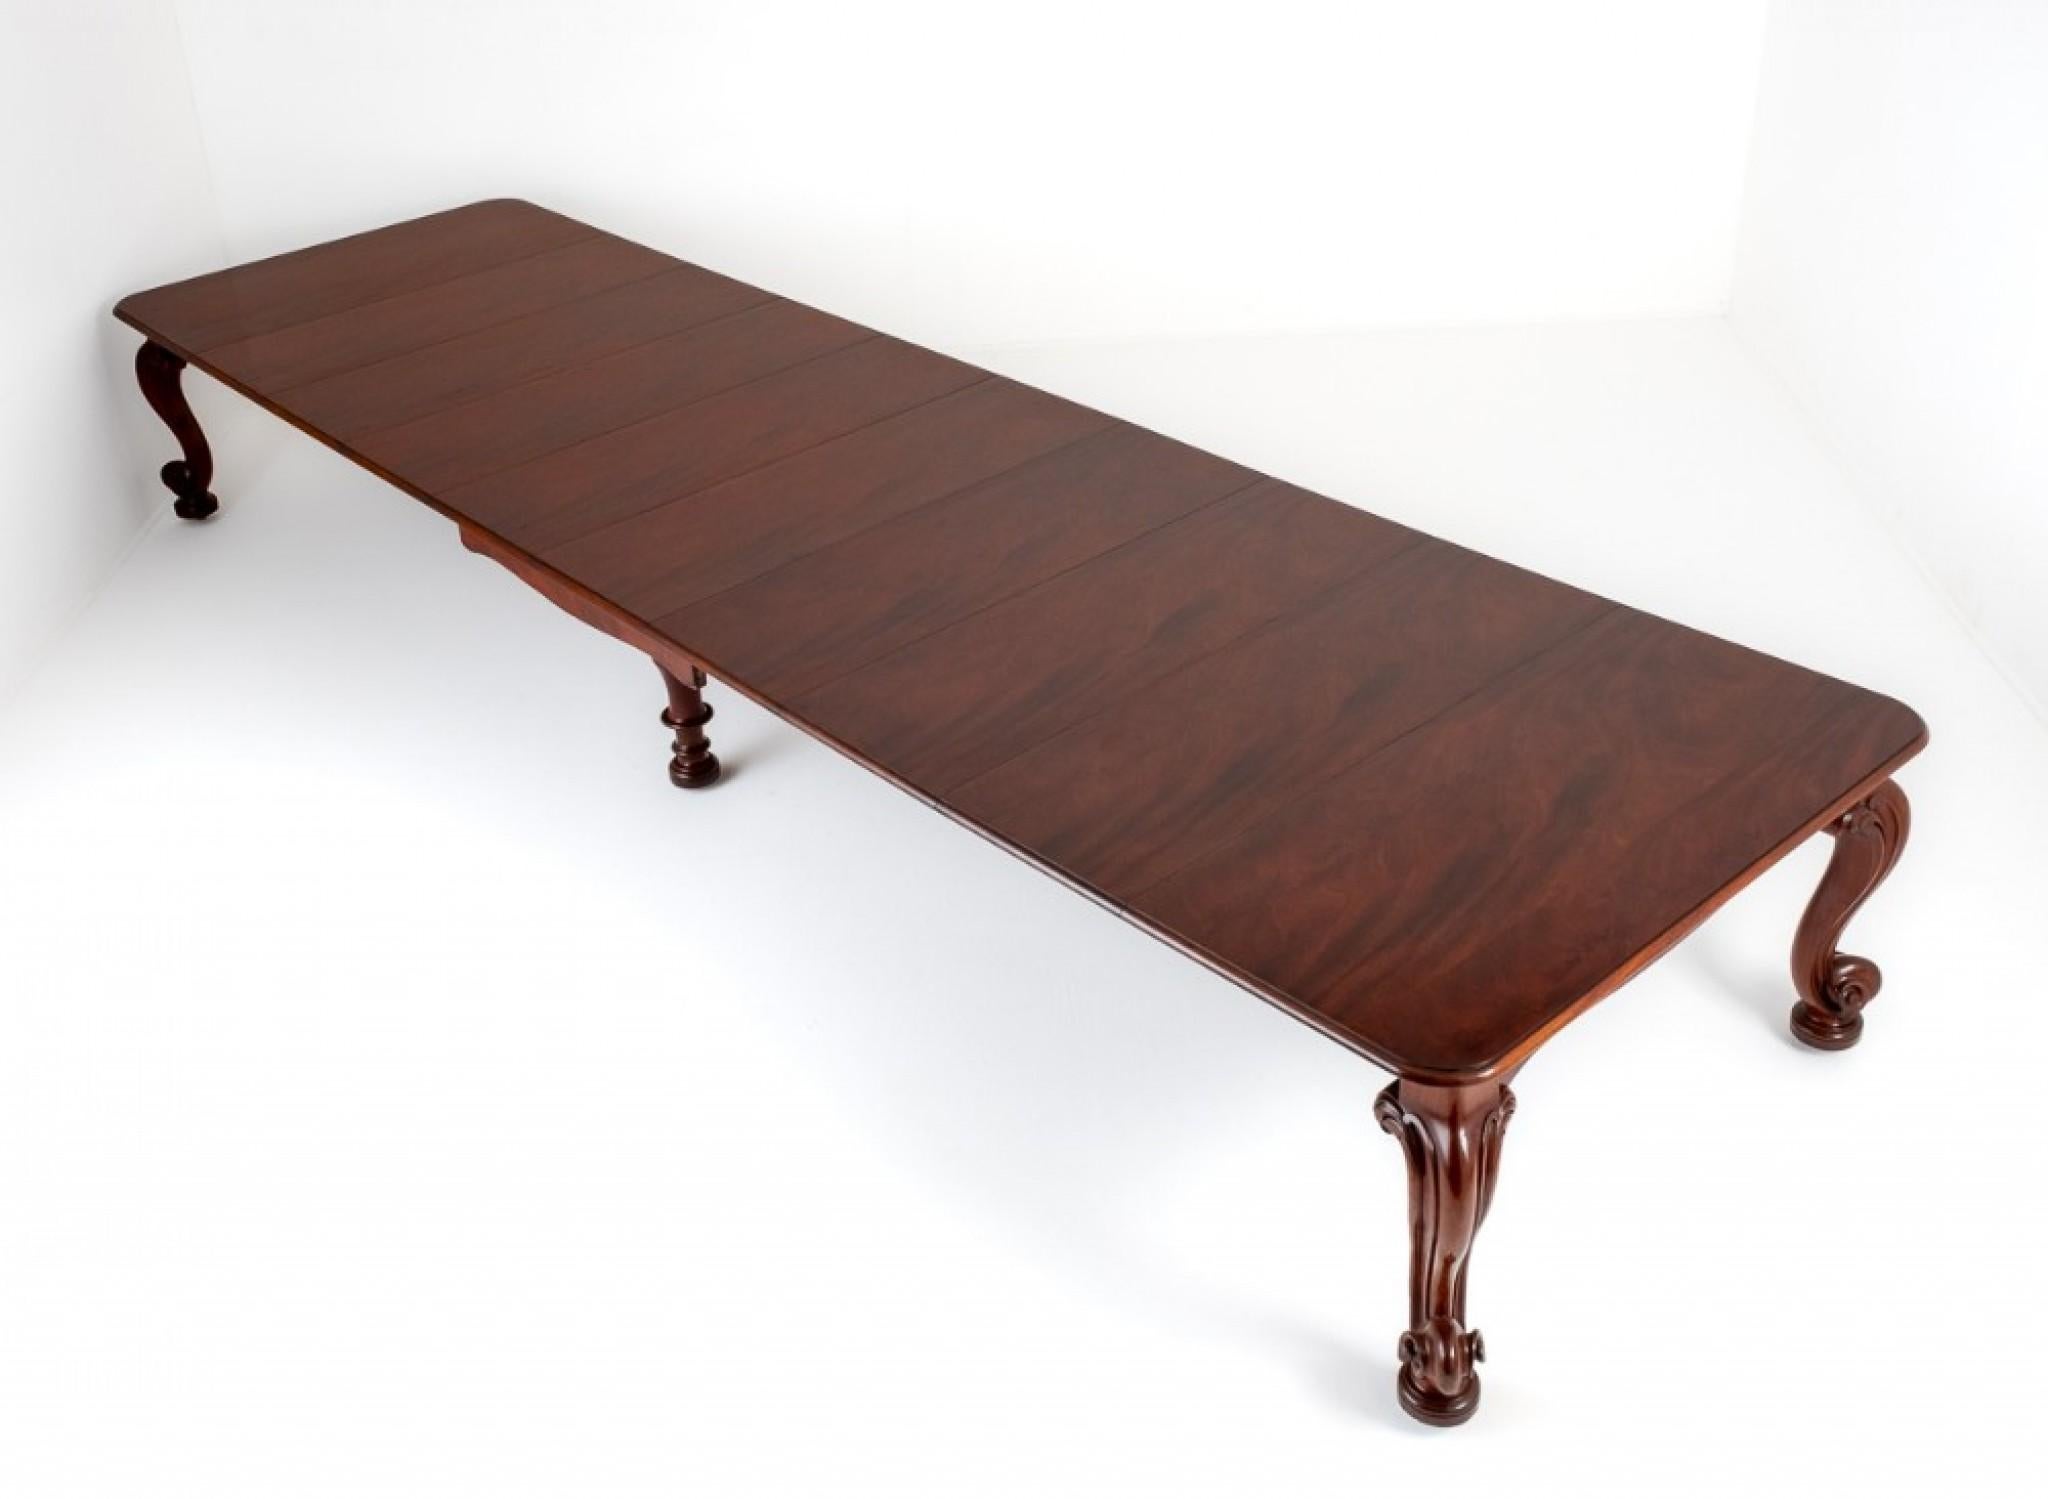 Mahogany Giant Victorian Dining Table Seats 24 by Samuel Hawkins 1860 For Sale